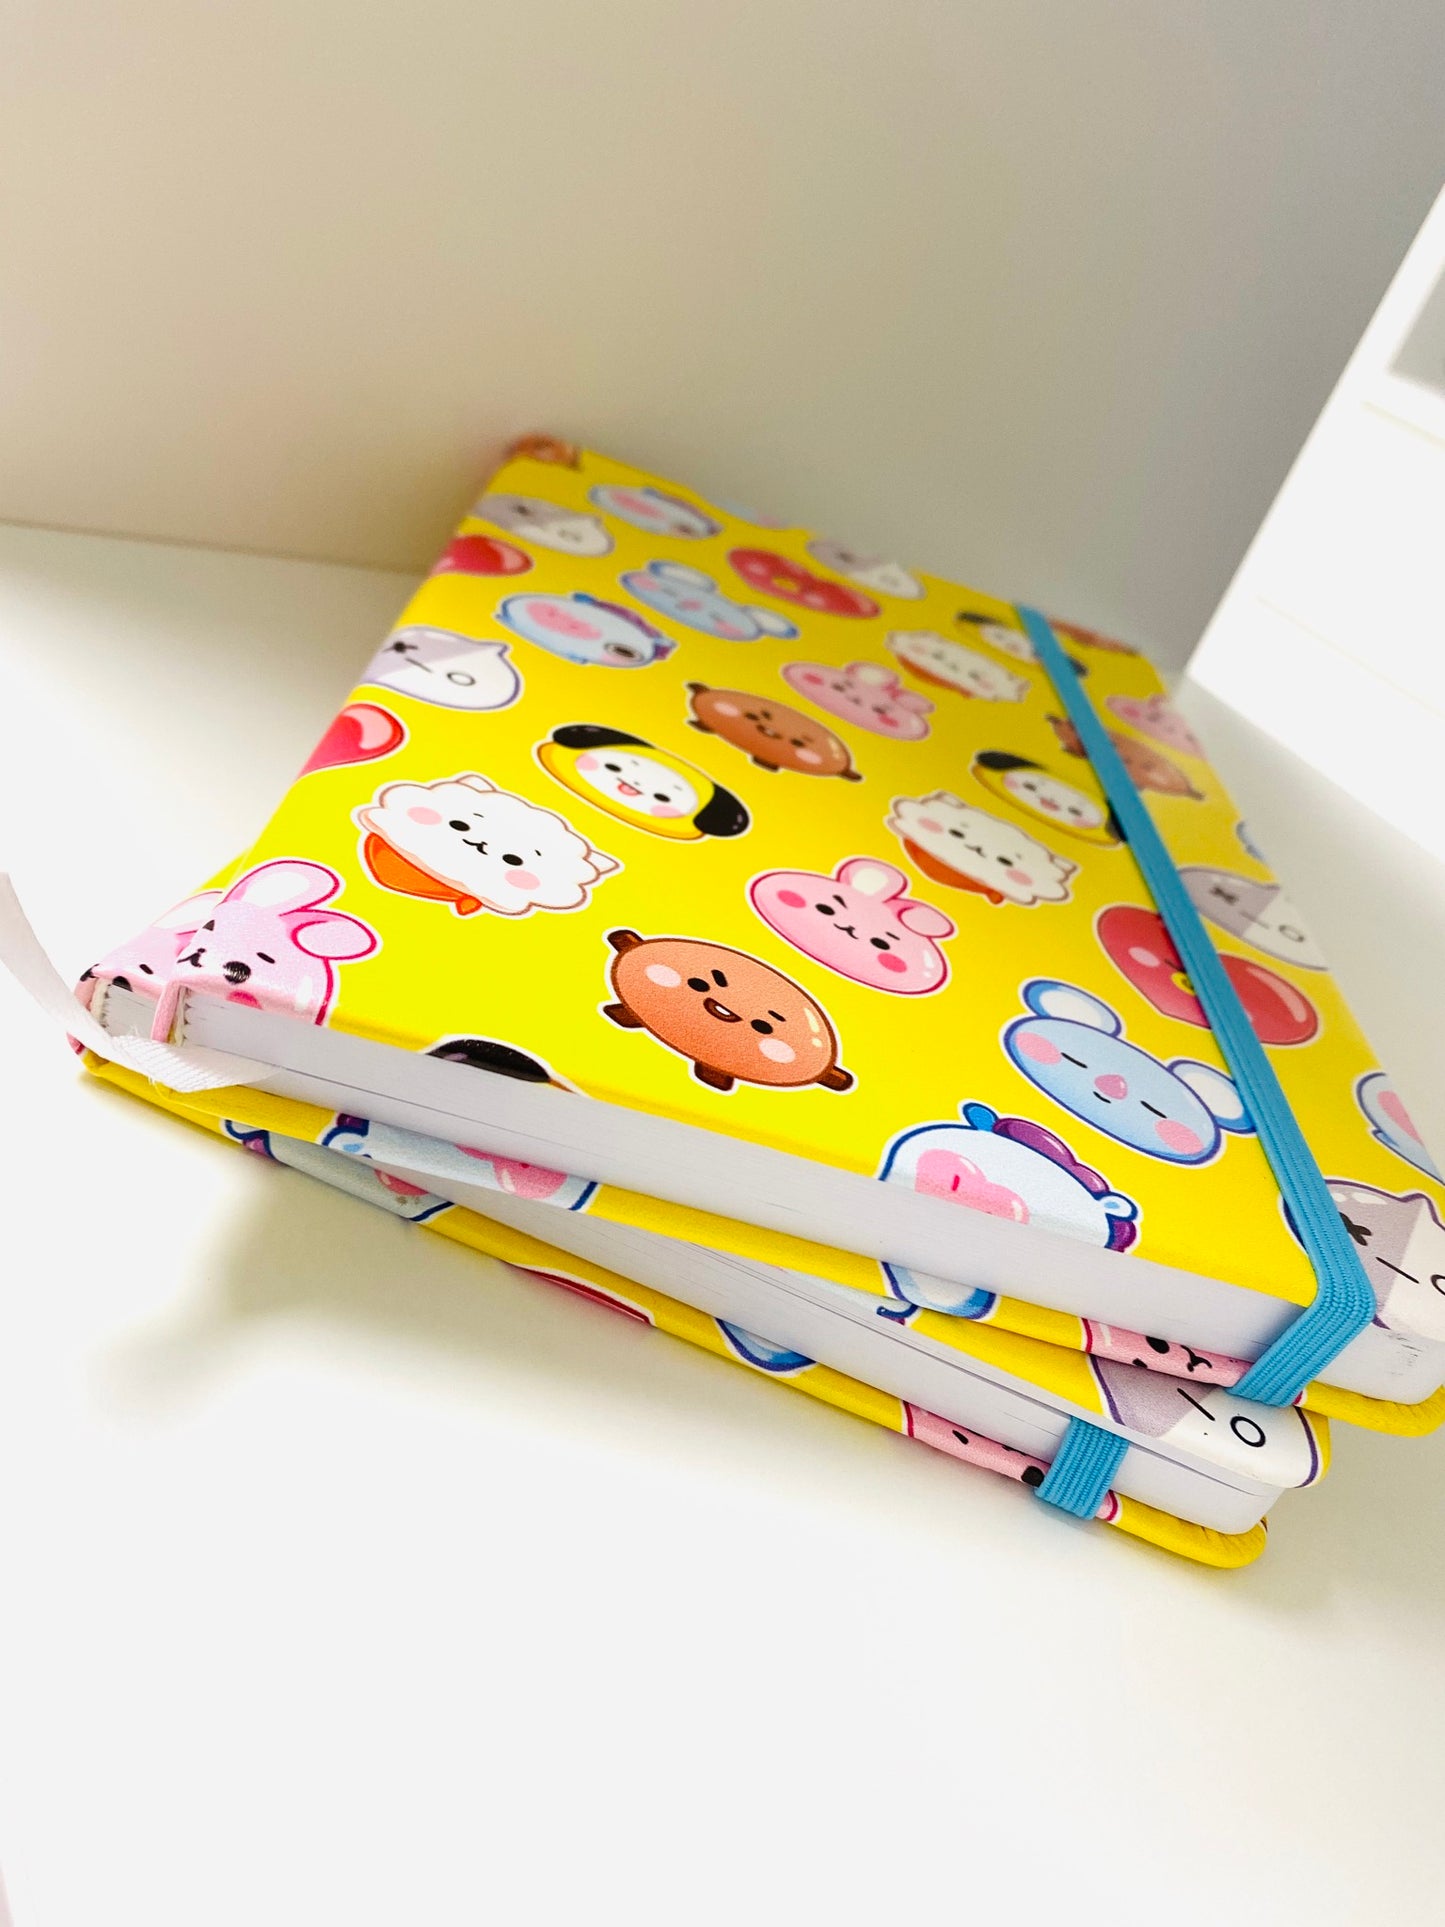 KPOP Dotted Notebook PU Faux leather Sketchbook 150gsm 40sheets/80pages Hard Cover